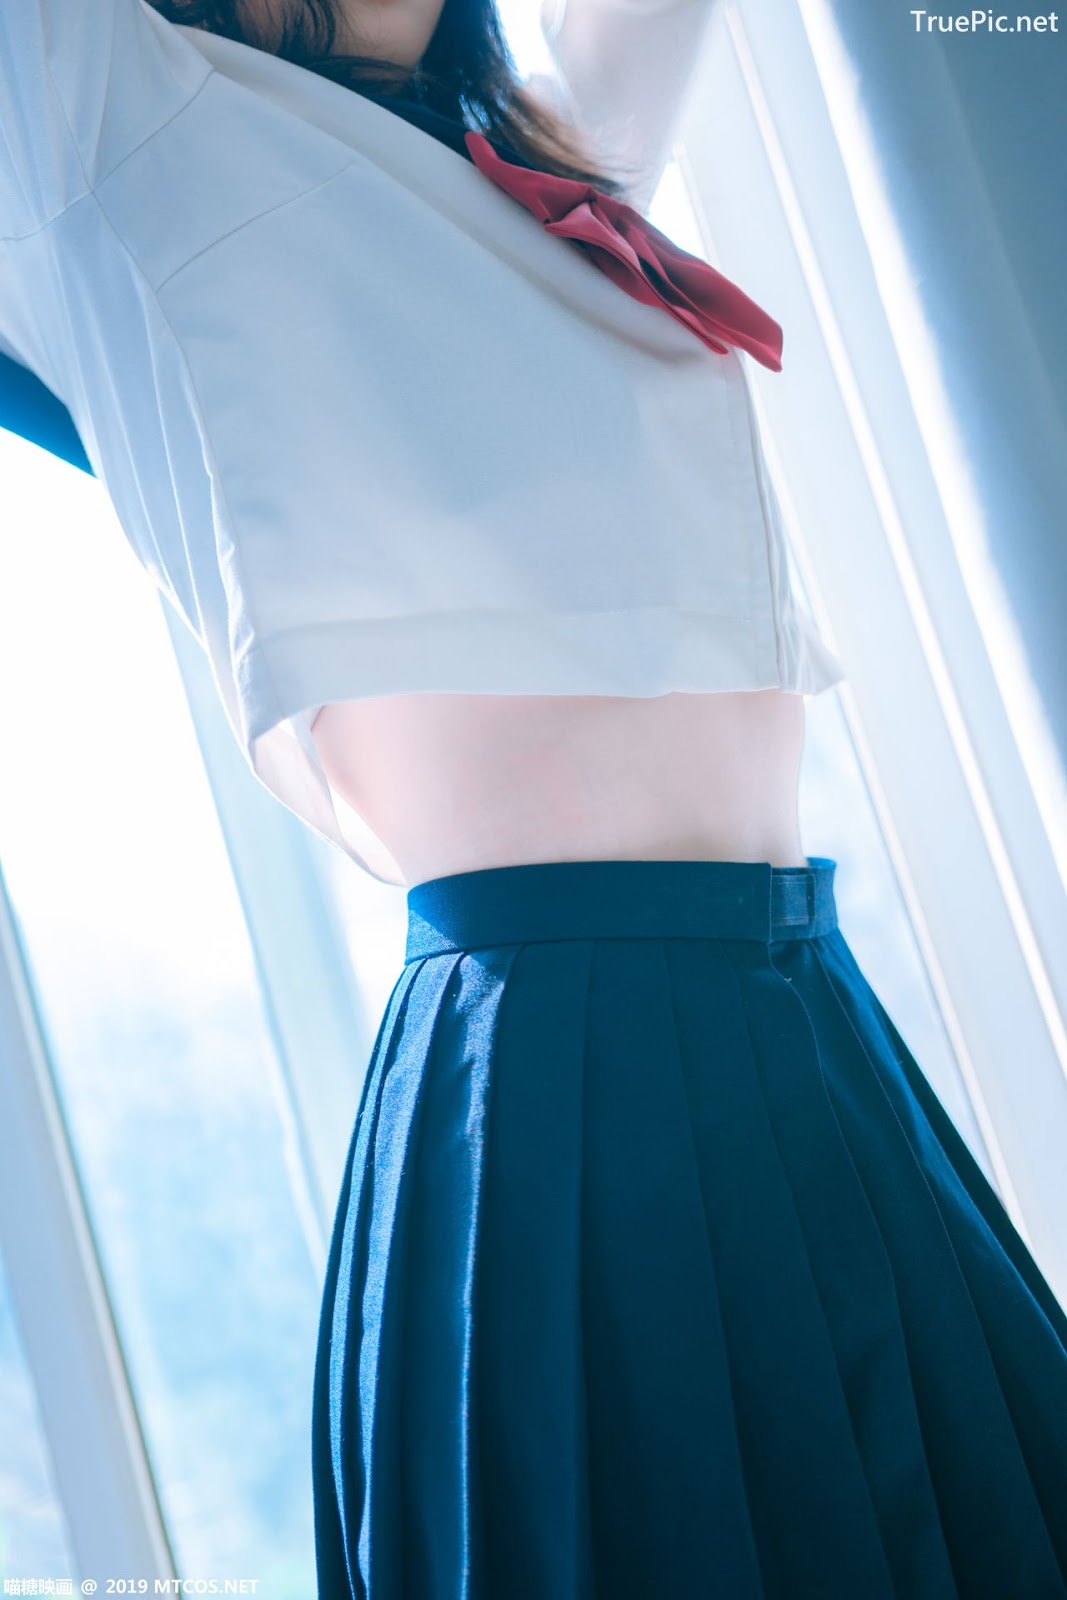 Image MTCos 喵糖映画 Vol.014 – Chinese Cute Model With Japanese School Uniform - TruePic.net- Picture-21